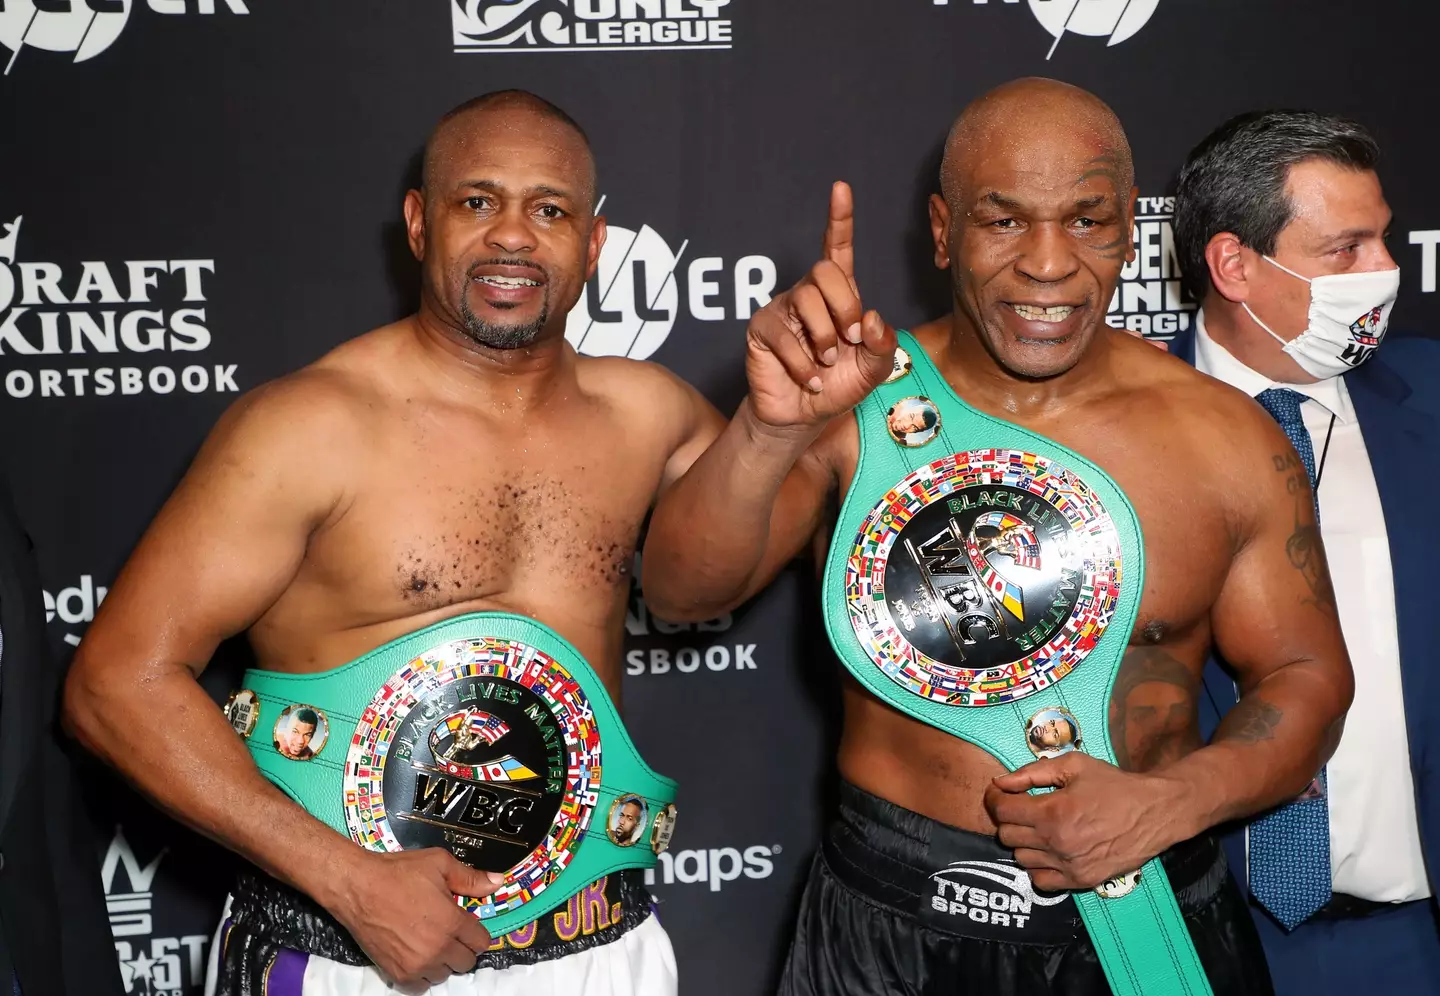 Mike Tyson and Roy Jones Jr with WBC titles after their exhibition bout. Image: Getty